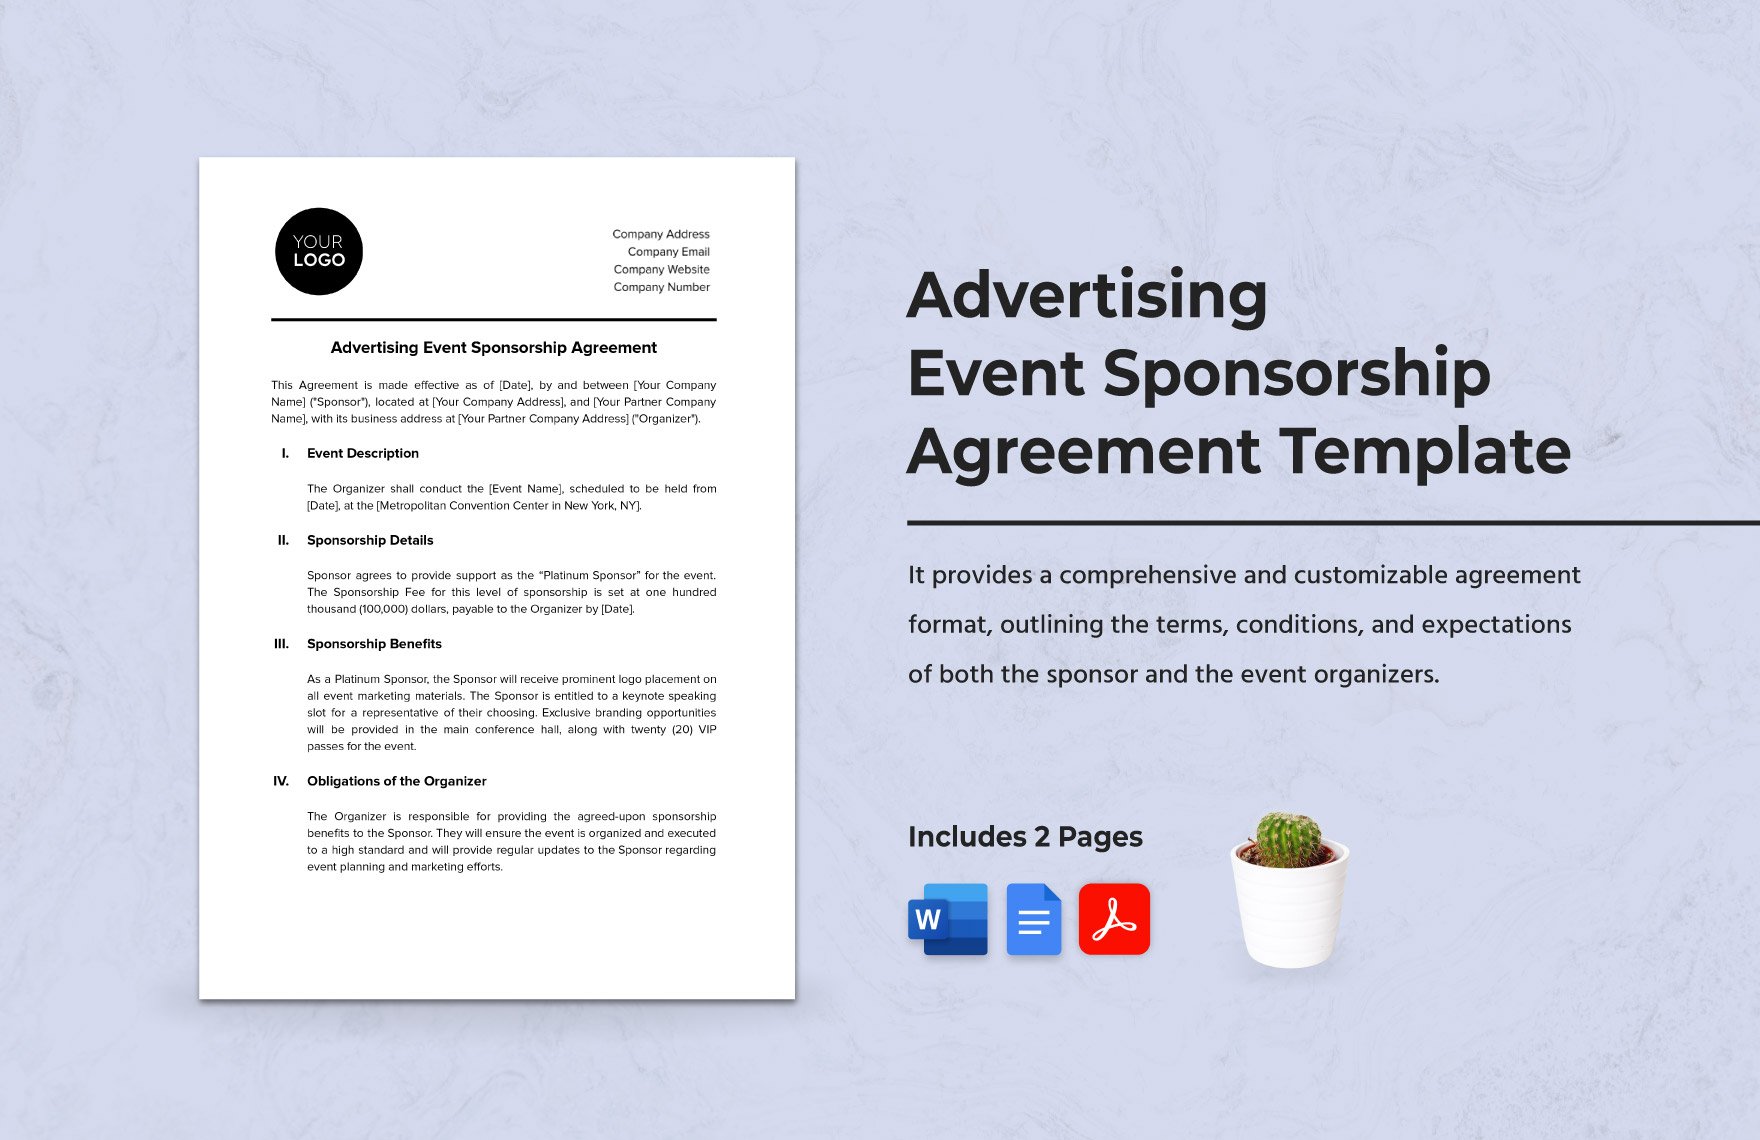 Advertising Event Sponsorship Agreement Template in Word, Google Docs, PDF